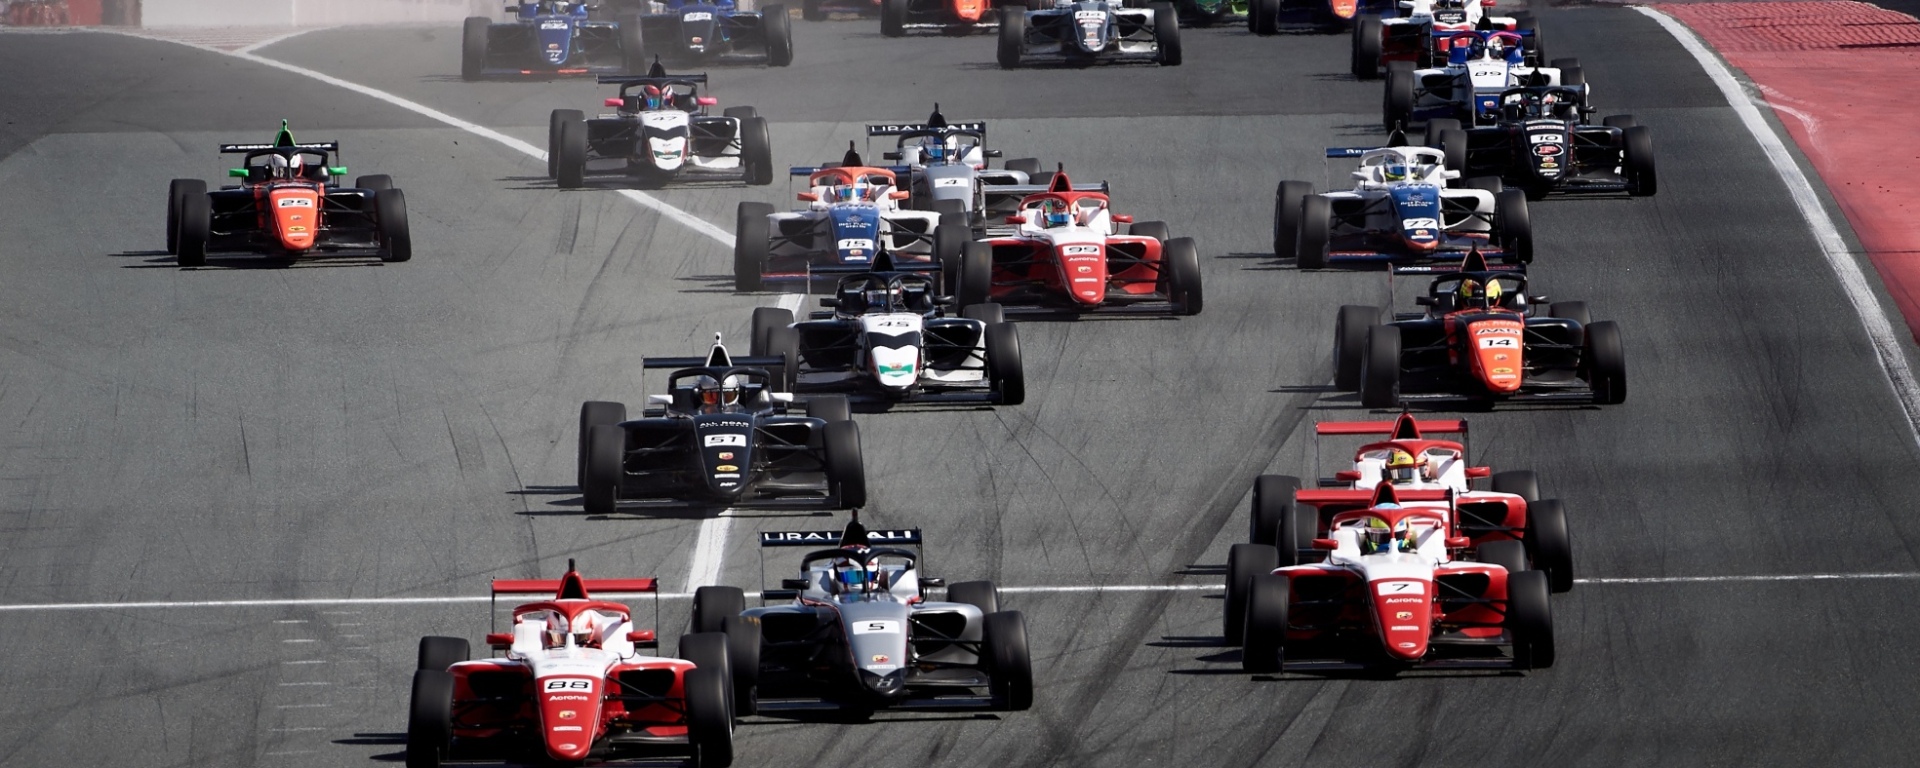 A group of 25+ open-wheel cars heads downhill on a straight